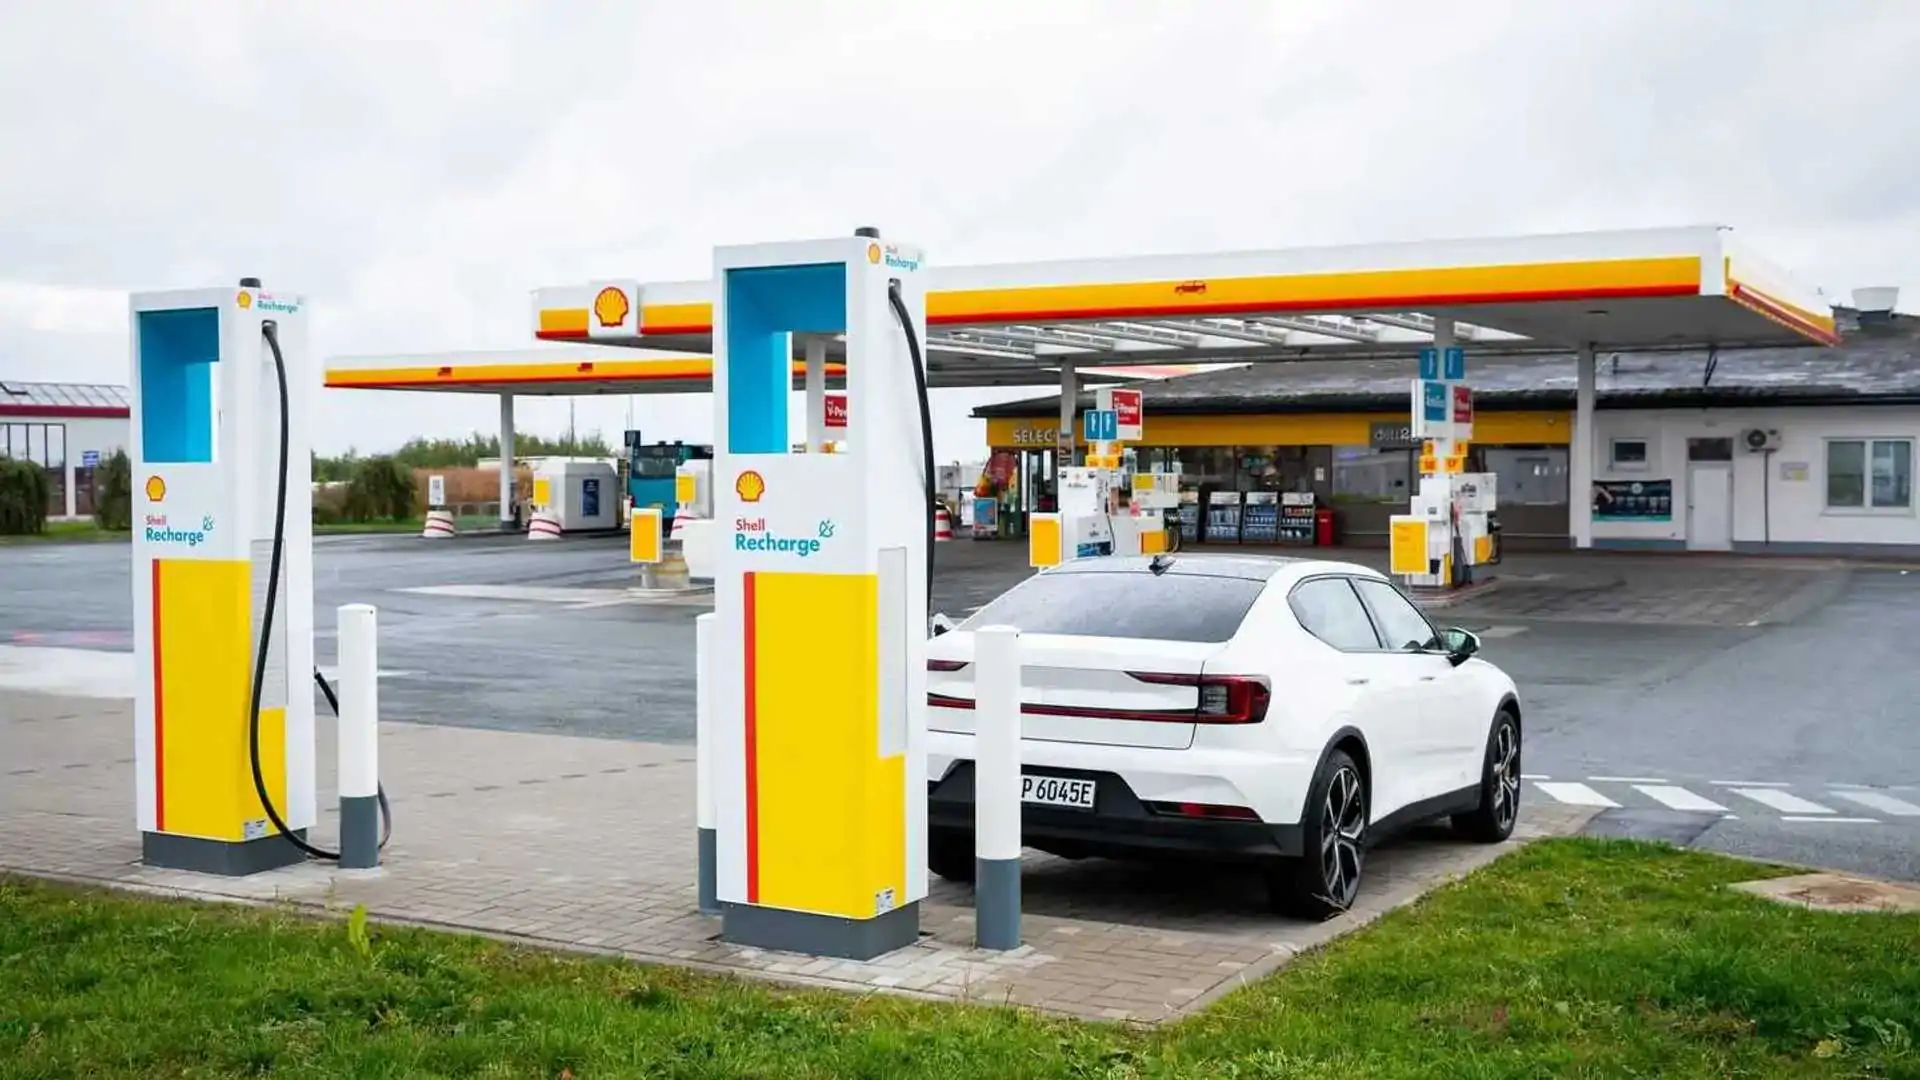 polestar-2-at-a-shell-fast-charging-station-abb-chargers.webp